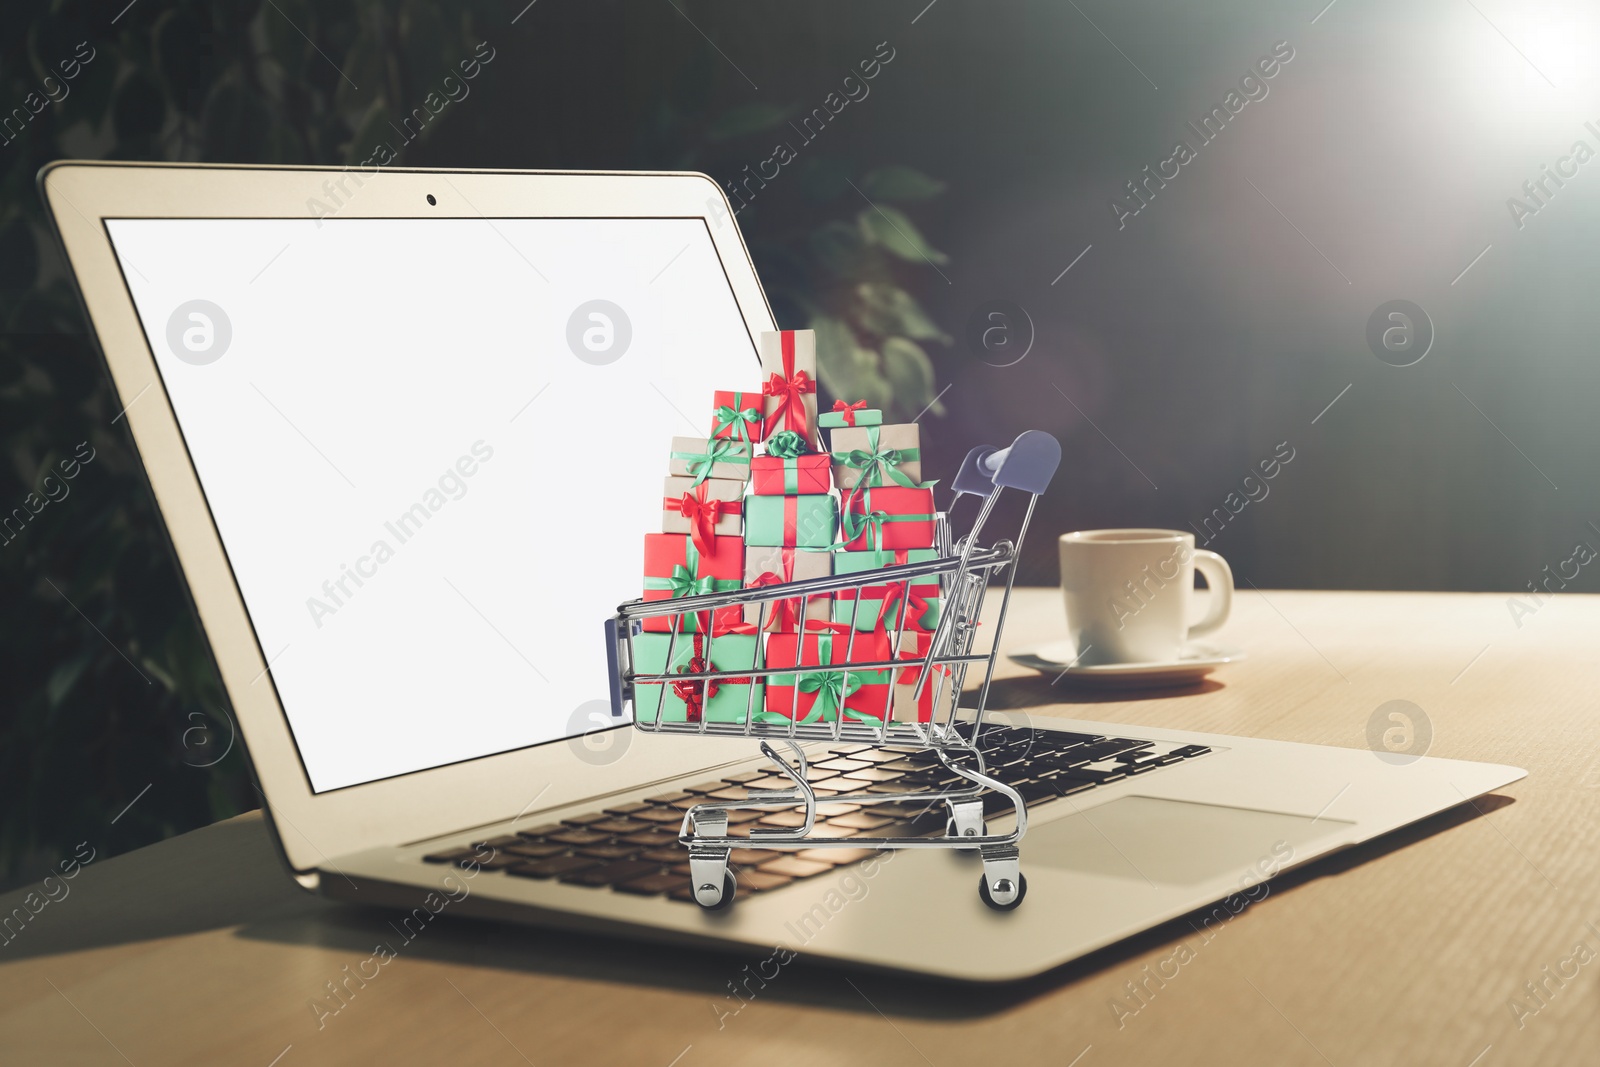 Image of Online shopping. Modern laptop and small cart with boxes on table